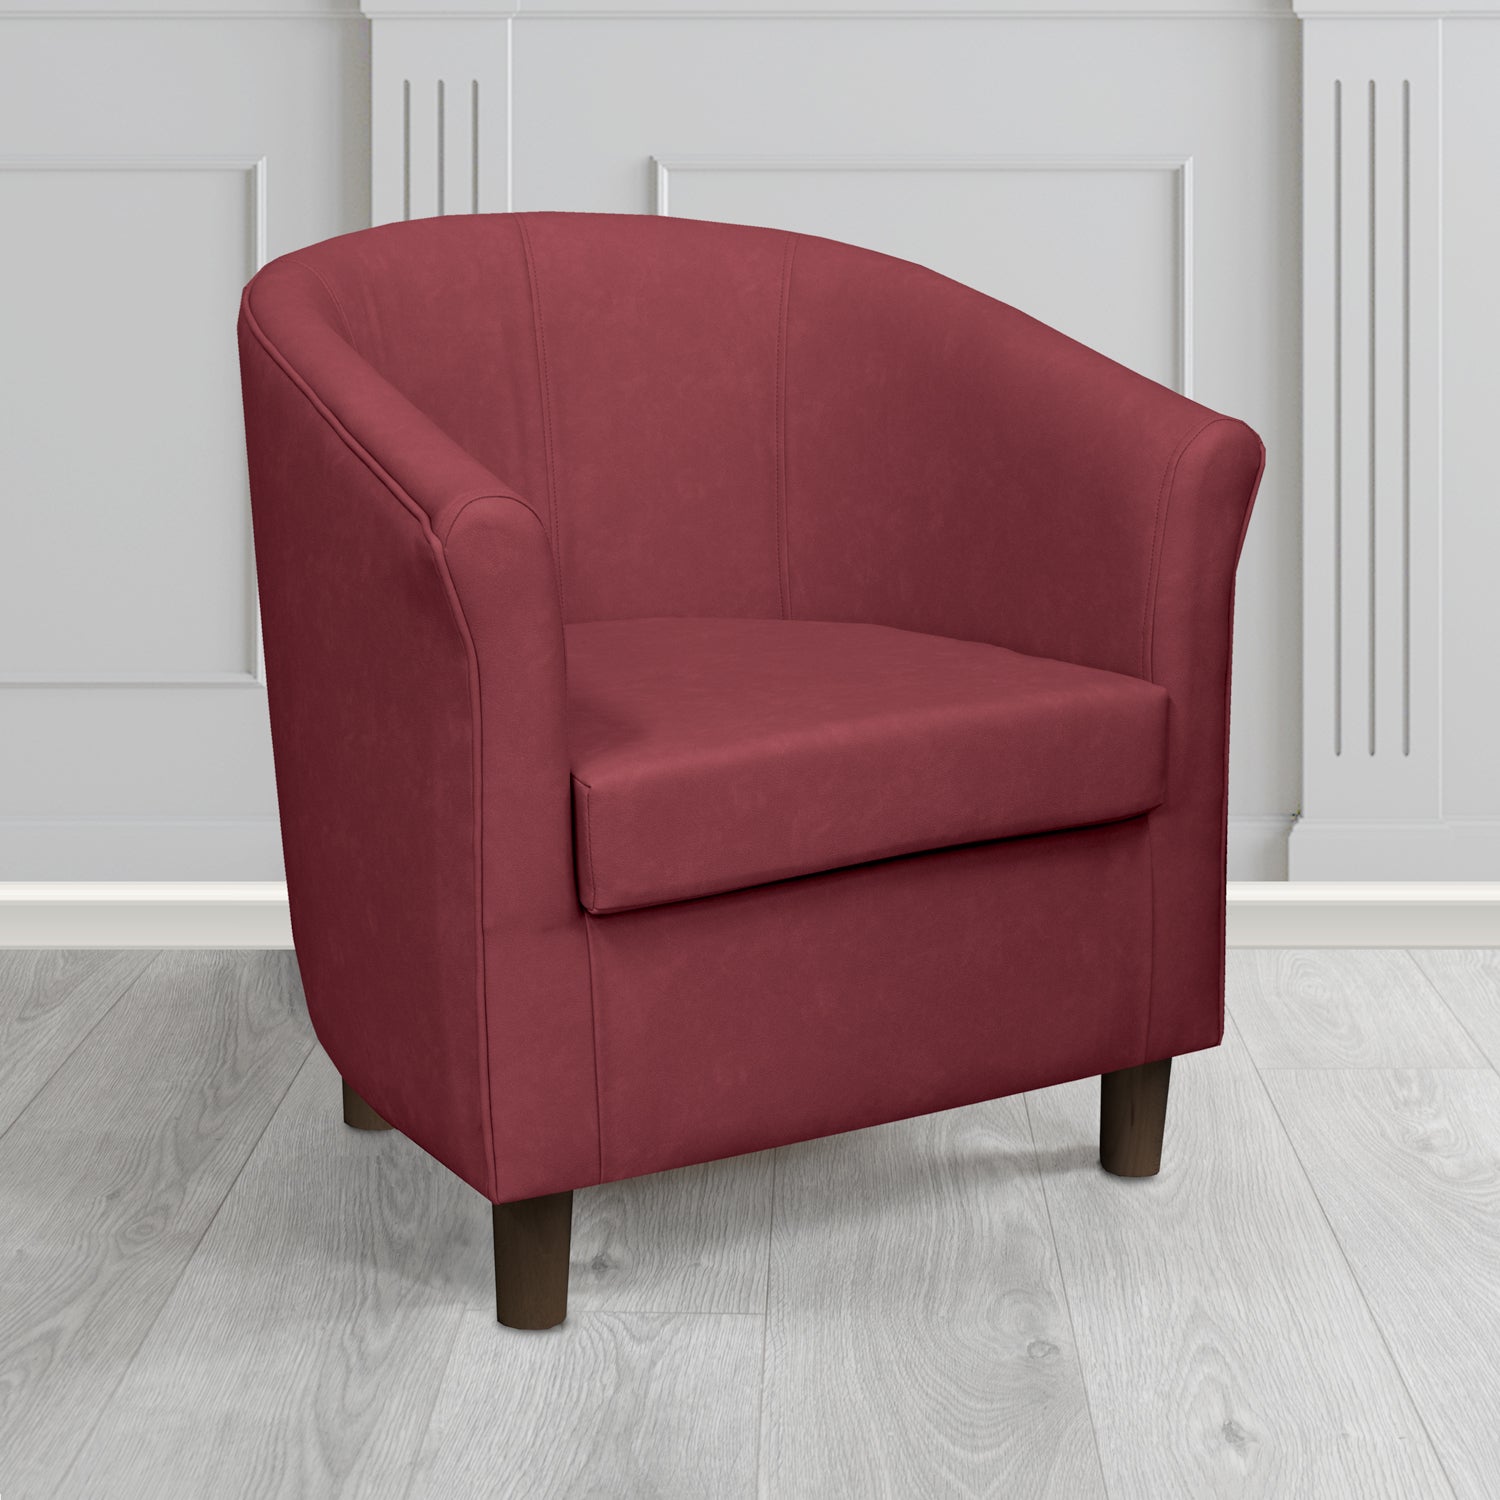 Tuscany Tub Chair in Infiniti Bordeaux INF1857 Antimicrobial Crib 5 Faux Leather - The Tub Chair Shop